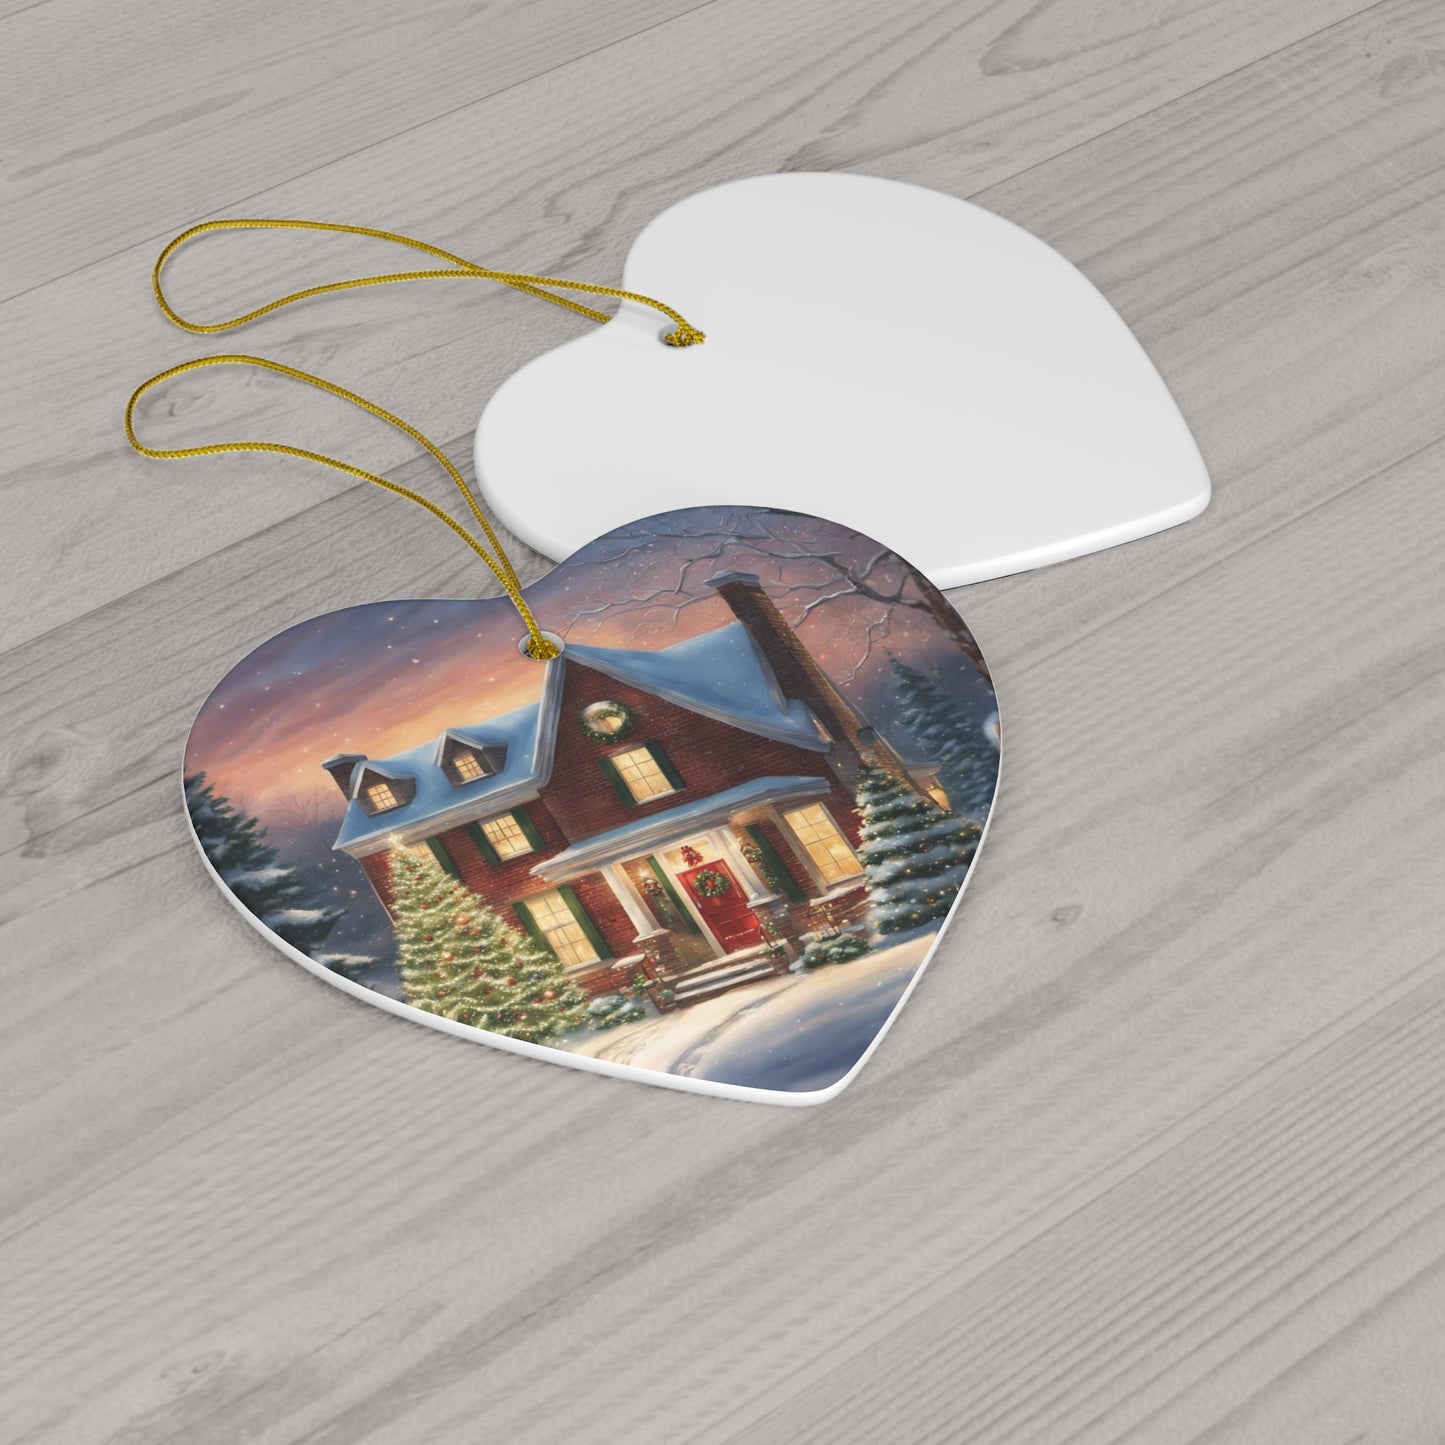 Child's Christmas Home in Dreams - Ceramic Ornament, 4 Shapes